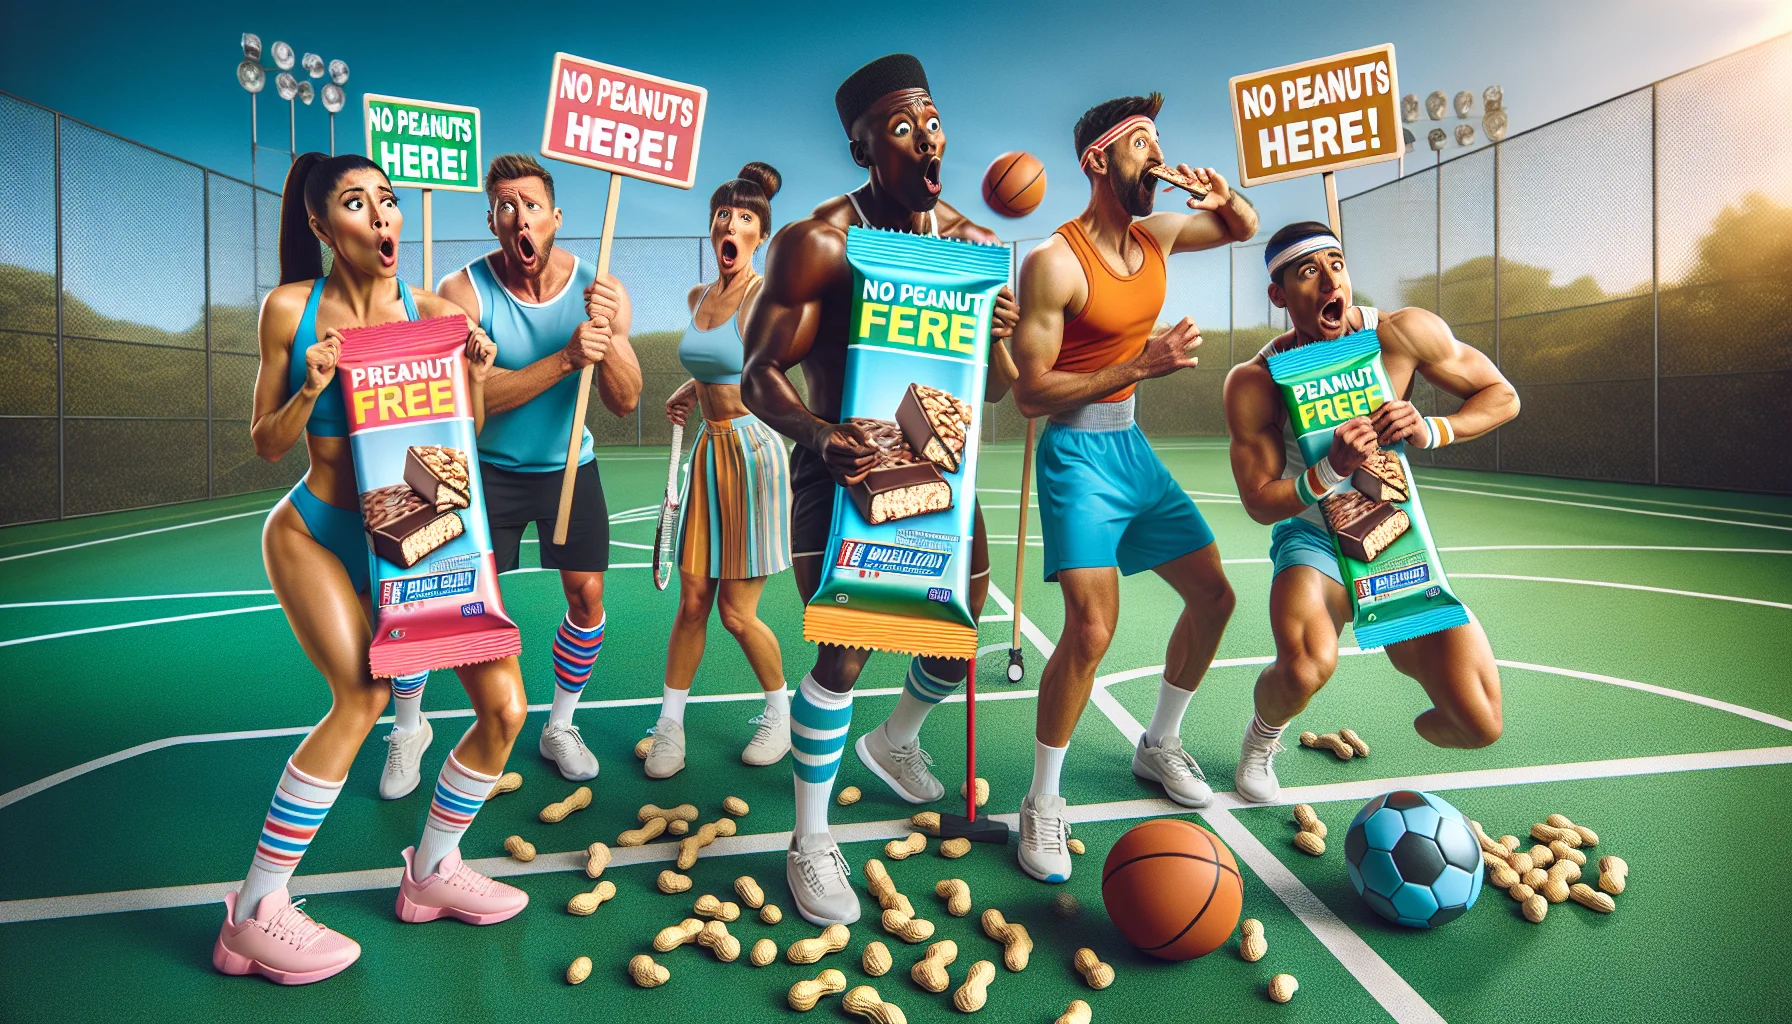 Visualize a humorous scene that encourages the use of protein supplements for sports. Picture a few mock-concerned, animated peanut free protein bars stepping away from a sporty scene. They hold small cartoonish banners saying 'No Peanuts Here!'. In the background, a trio of athletes from different sports - a Caucasian female soccer player, a Black male tennis player, and a Middle-Eastern female boxer - are enjoyably chowing down on alternative protein bars, their faces filled with exaggerated delight. They wear vibrant, sports-specific outfits, and are situated in an outdoor, bright and energetic environment, perhaps a sports field or gym. Be sure to capture the lighthearted mood and the glowing emphasis on the advantages of peanut-free sports protein supplements.